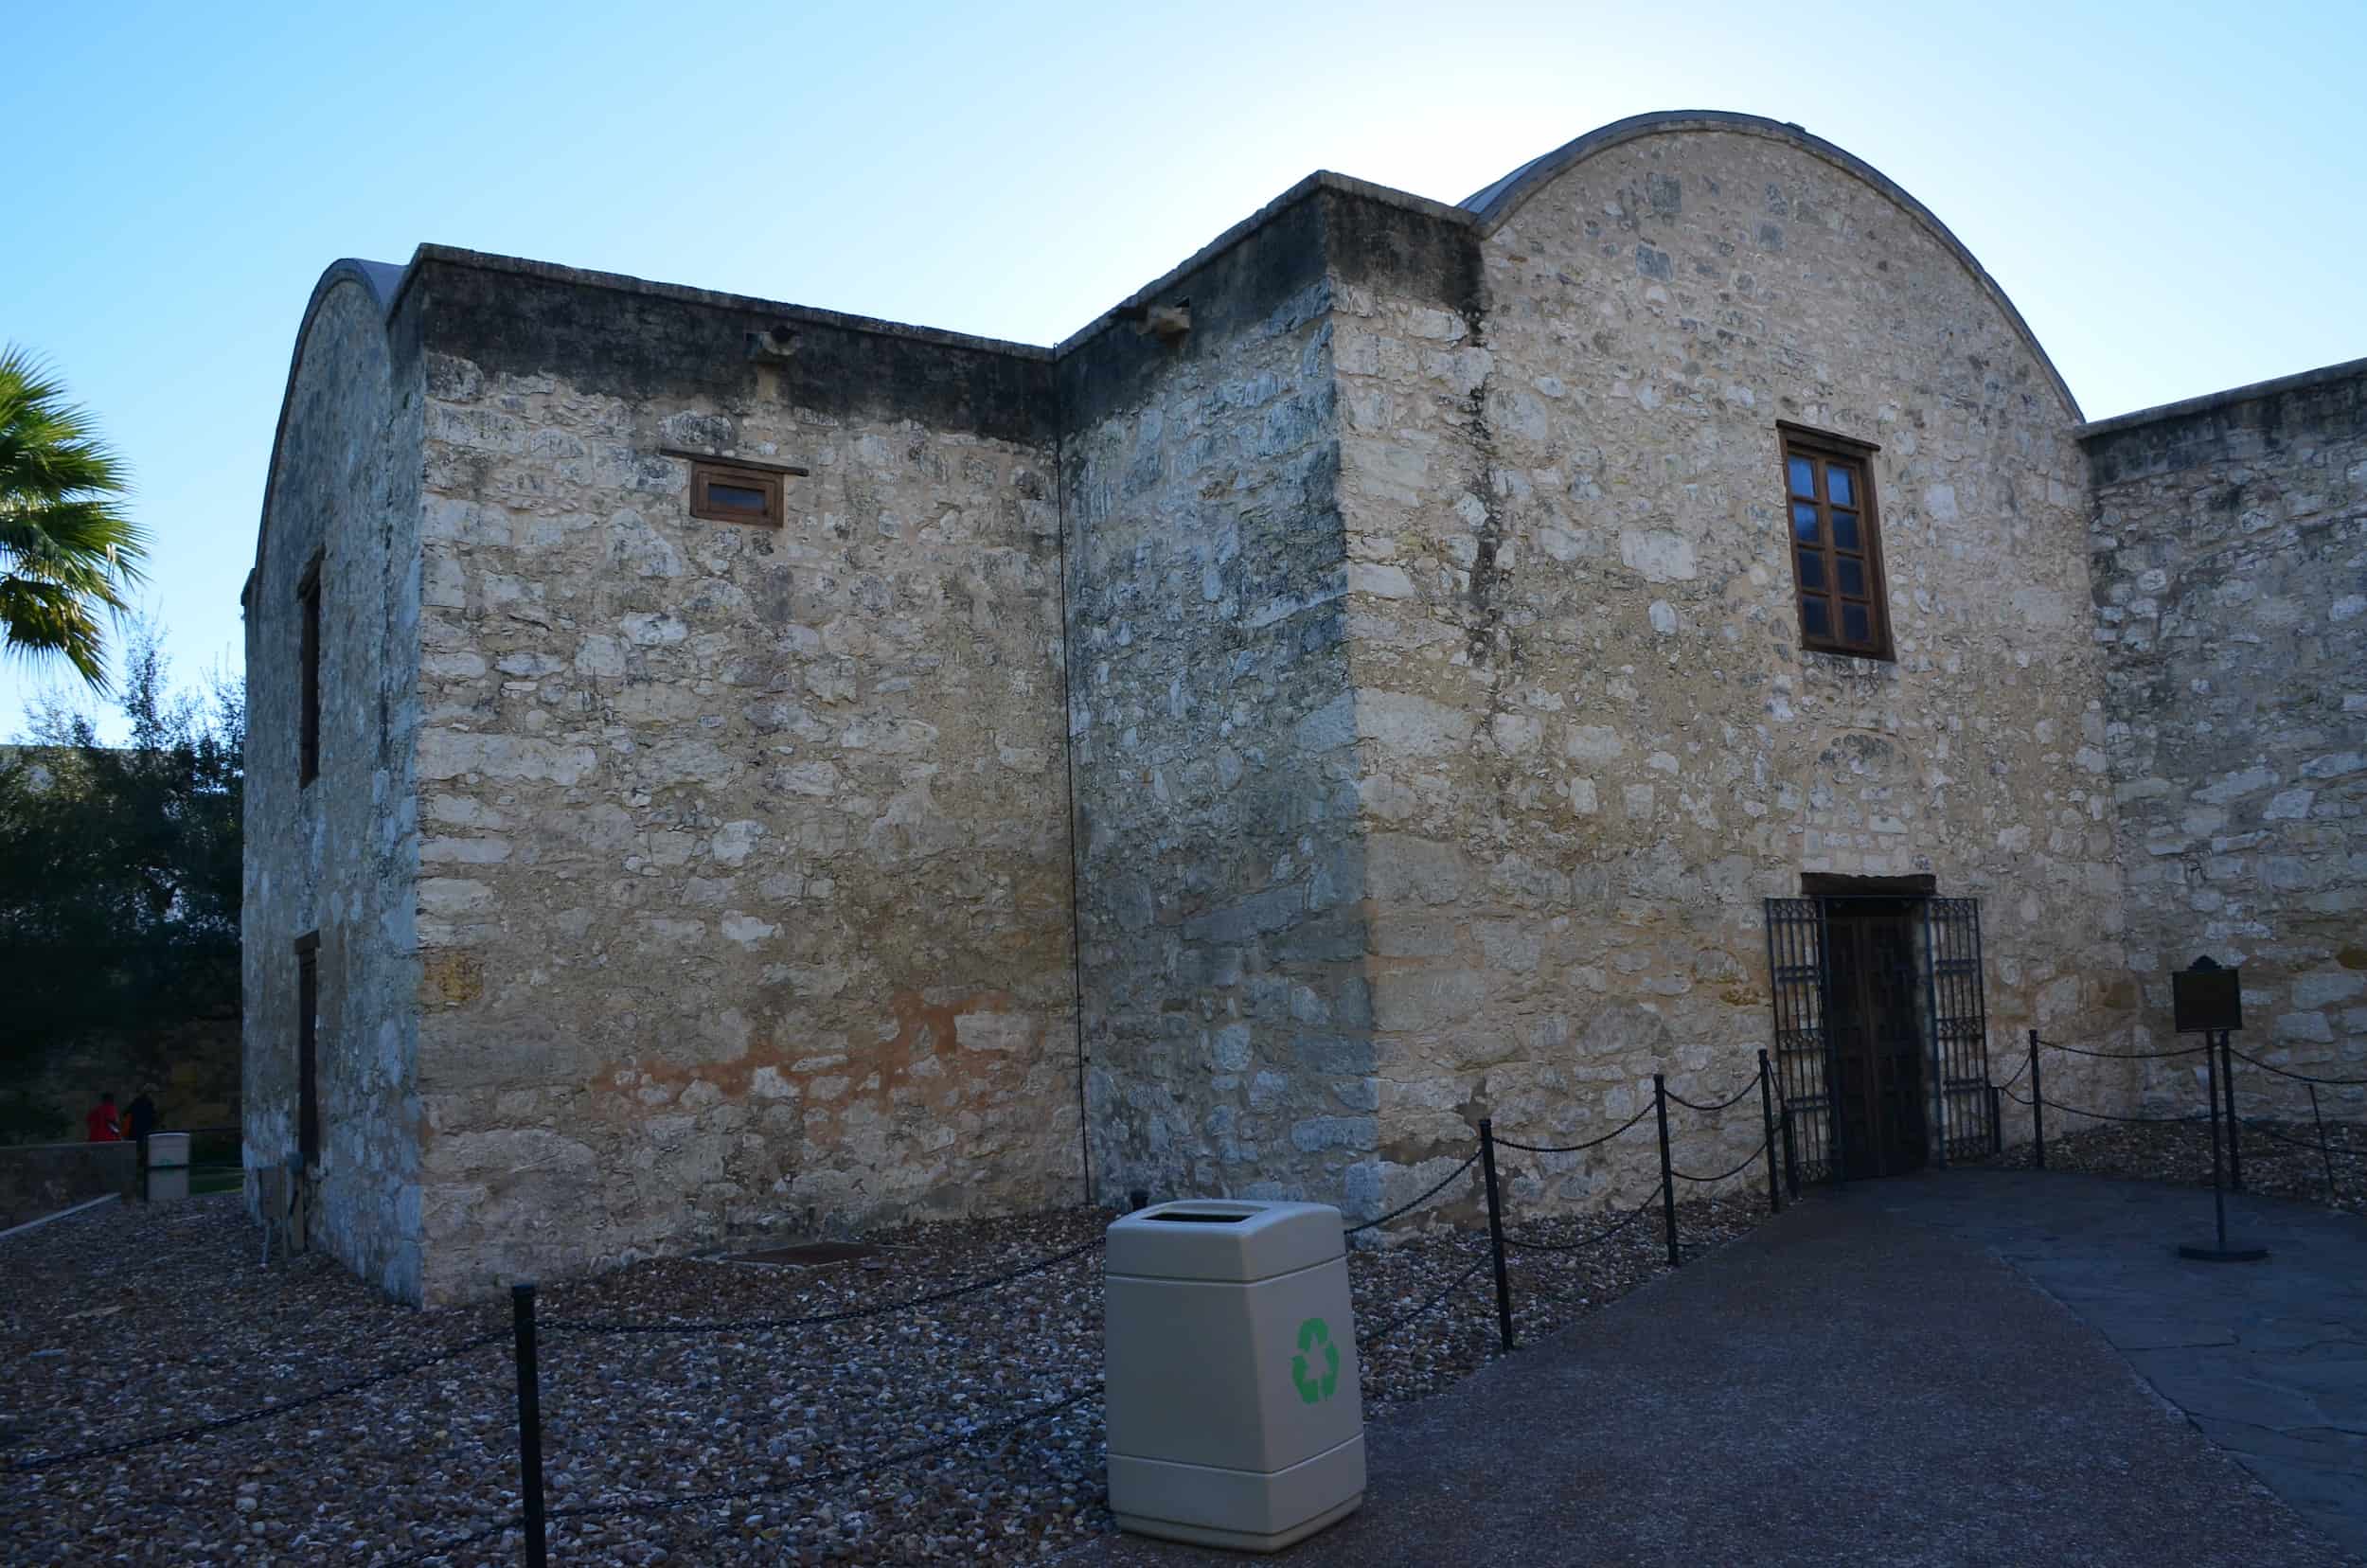 Side view of the Alamo